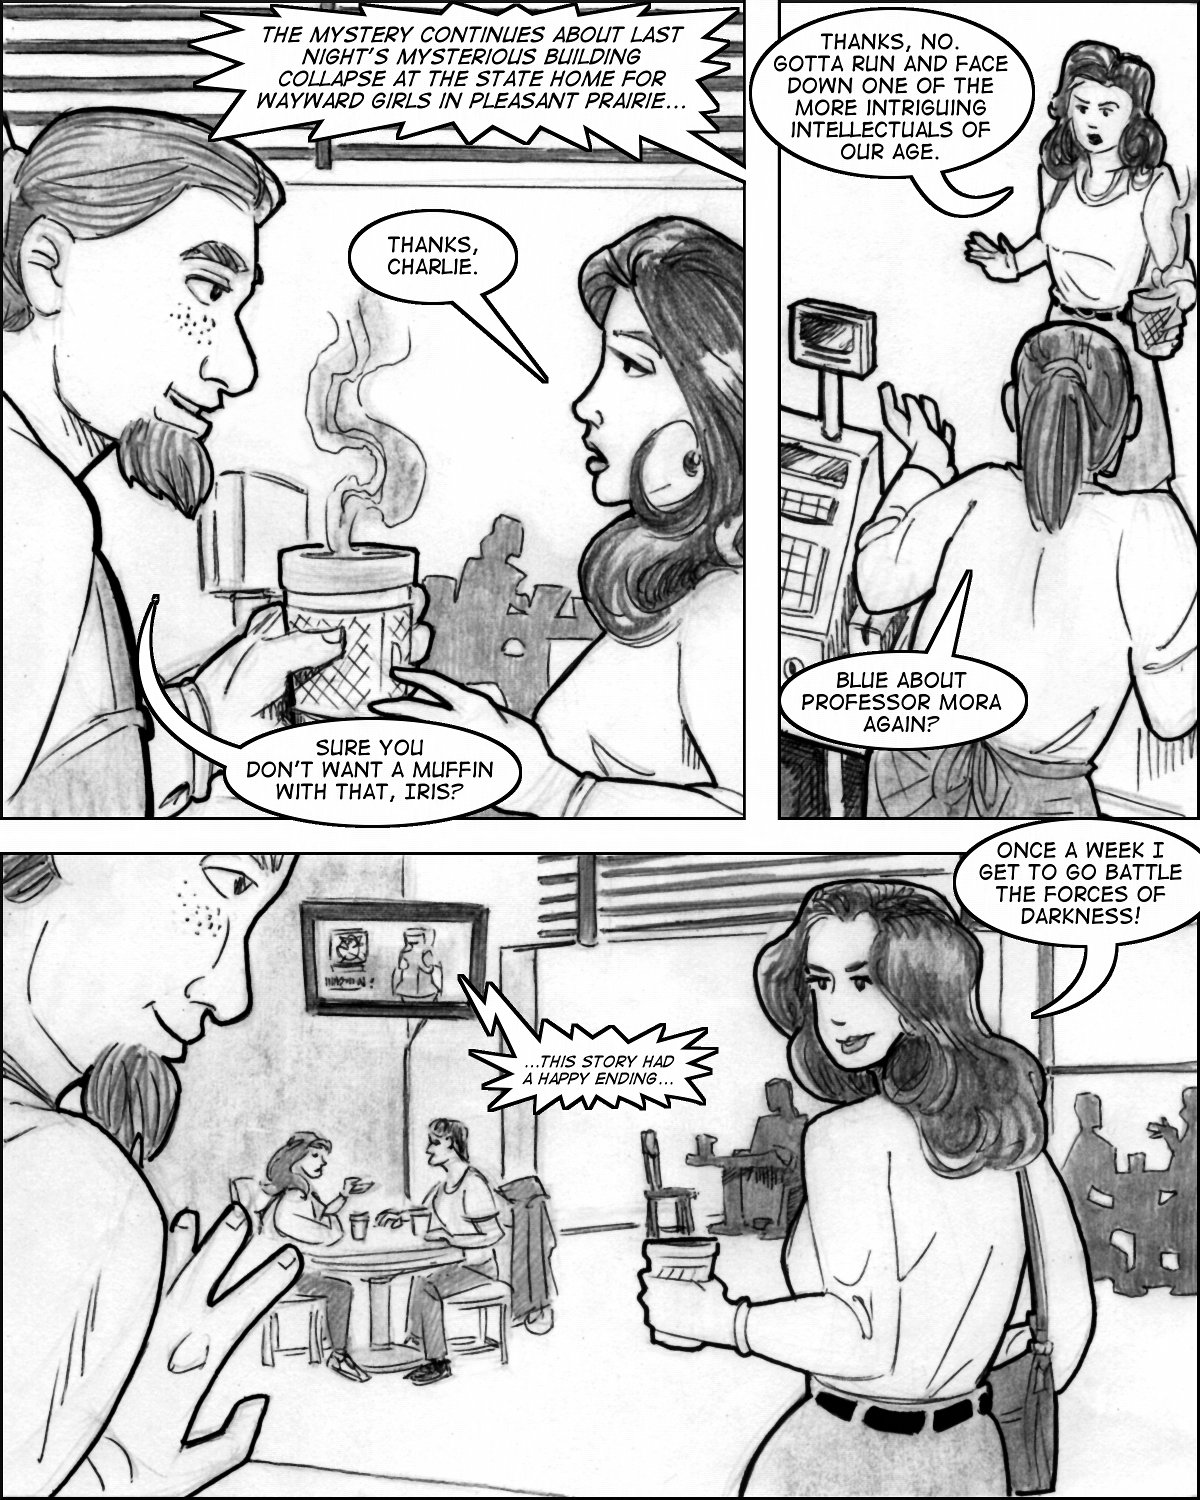 Iris gets coffee, while a piece of the Invisible Girl, Heroine story goes on.